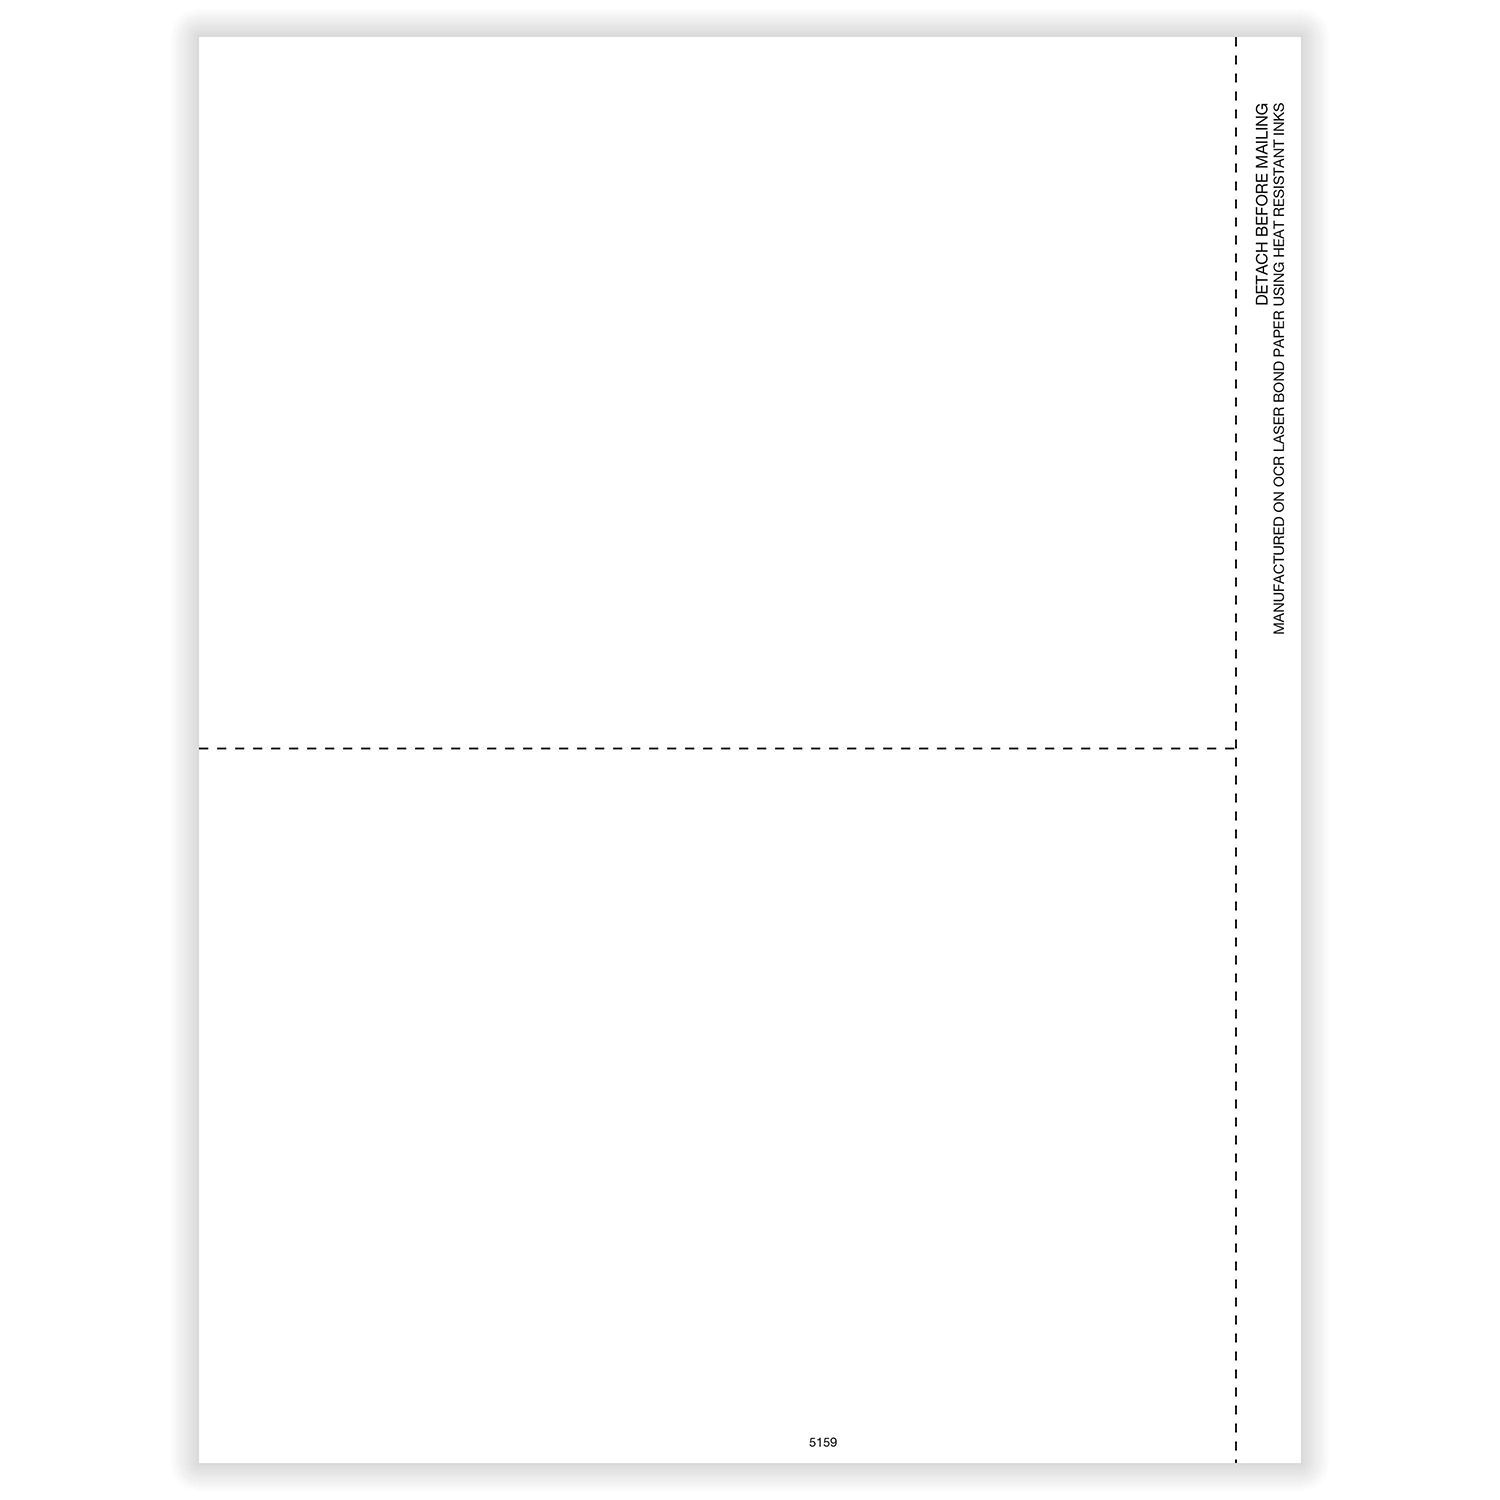 Picture of 1099-MISC Blank, Copy B, 2-Up, Stub, w/ Backer (1,000 Forms)